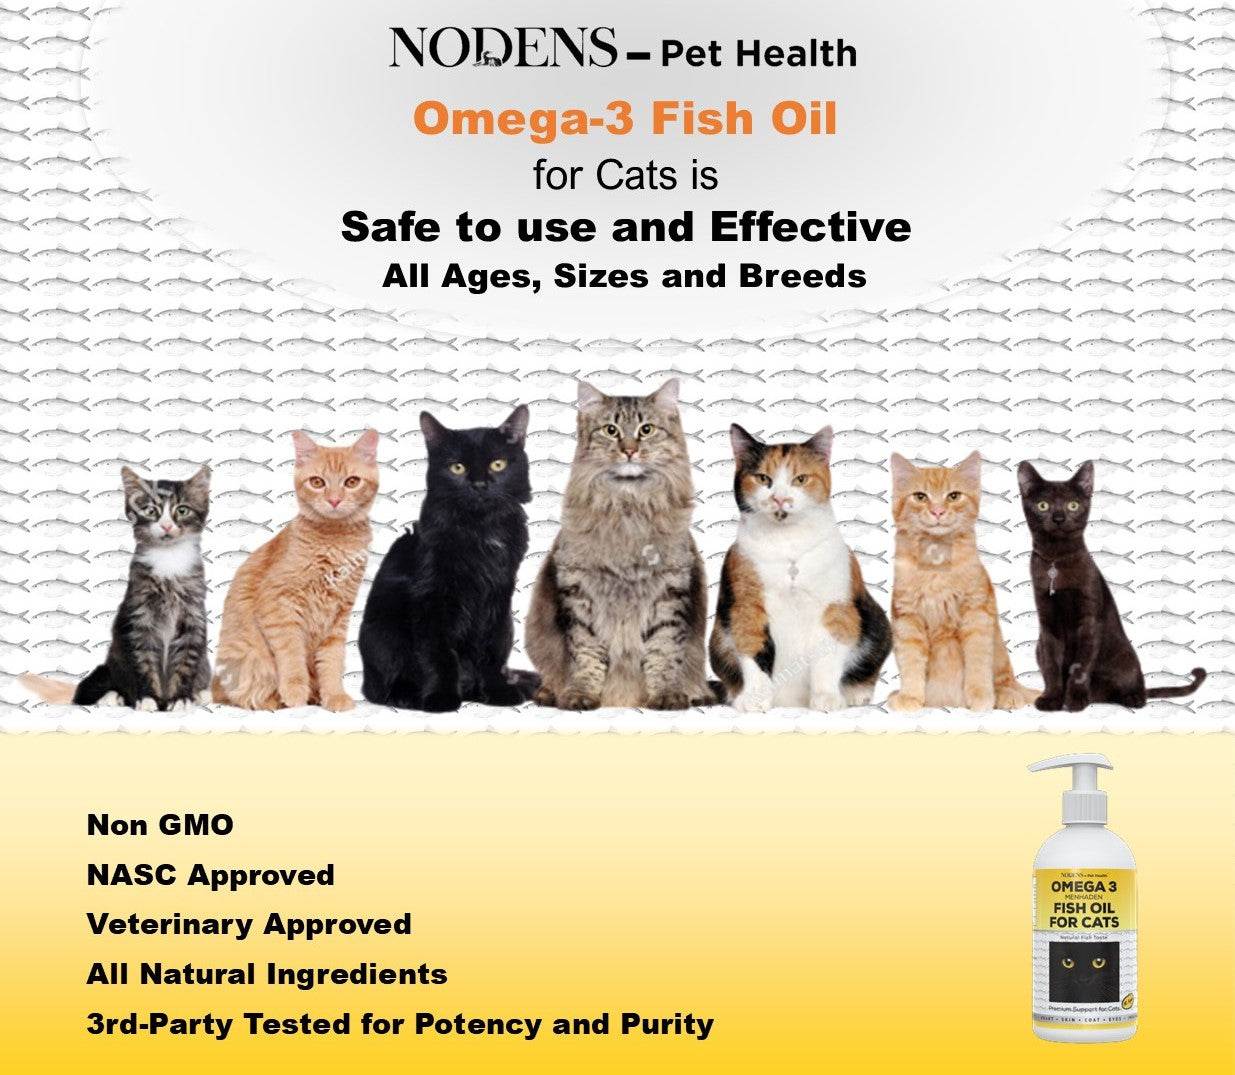 Nodens Omega-3 Fish oil for all cats